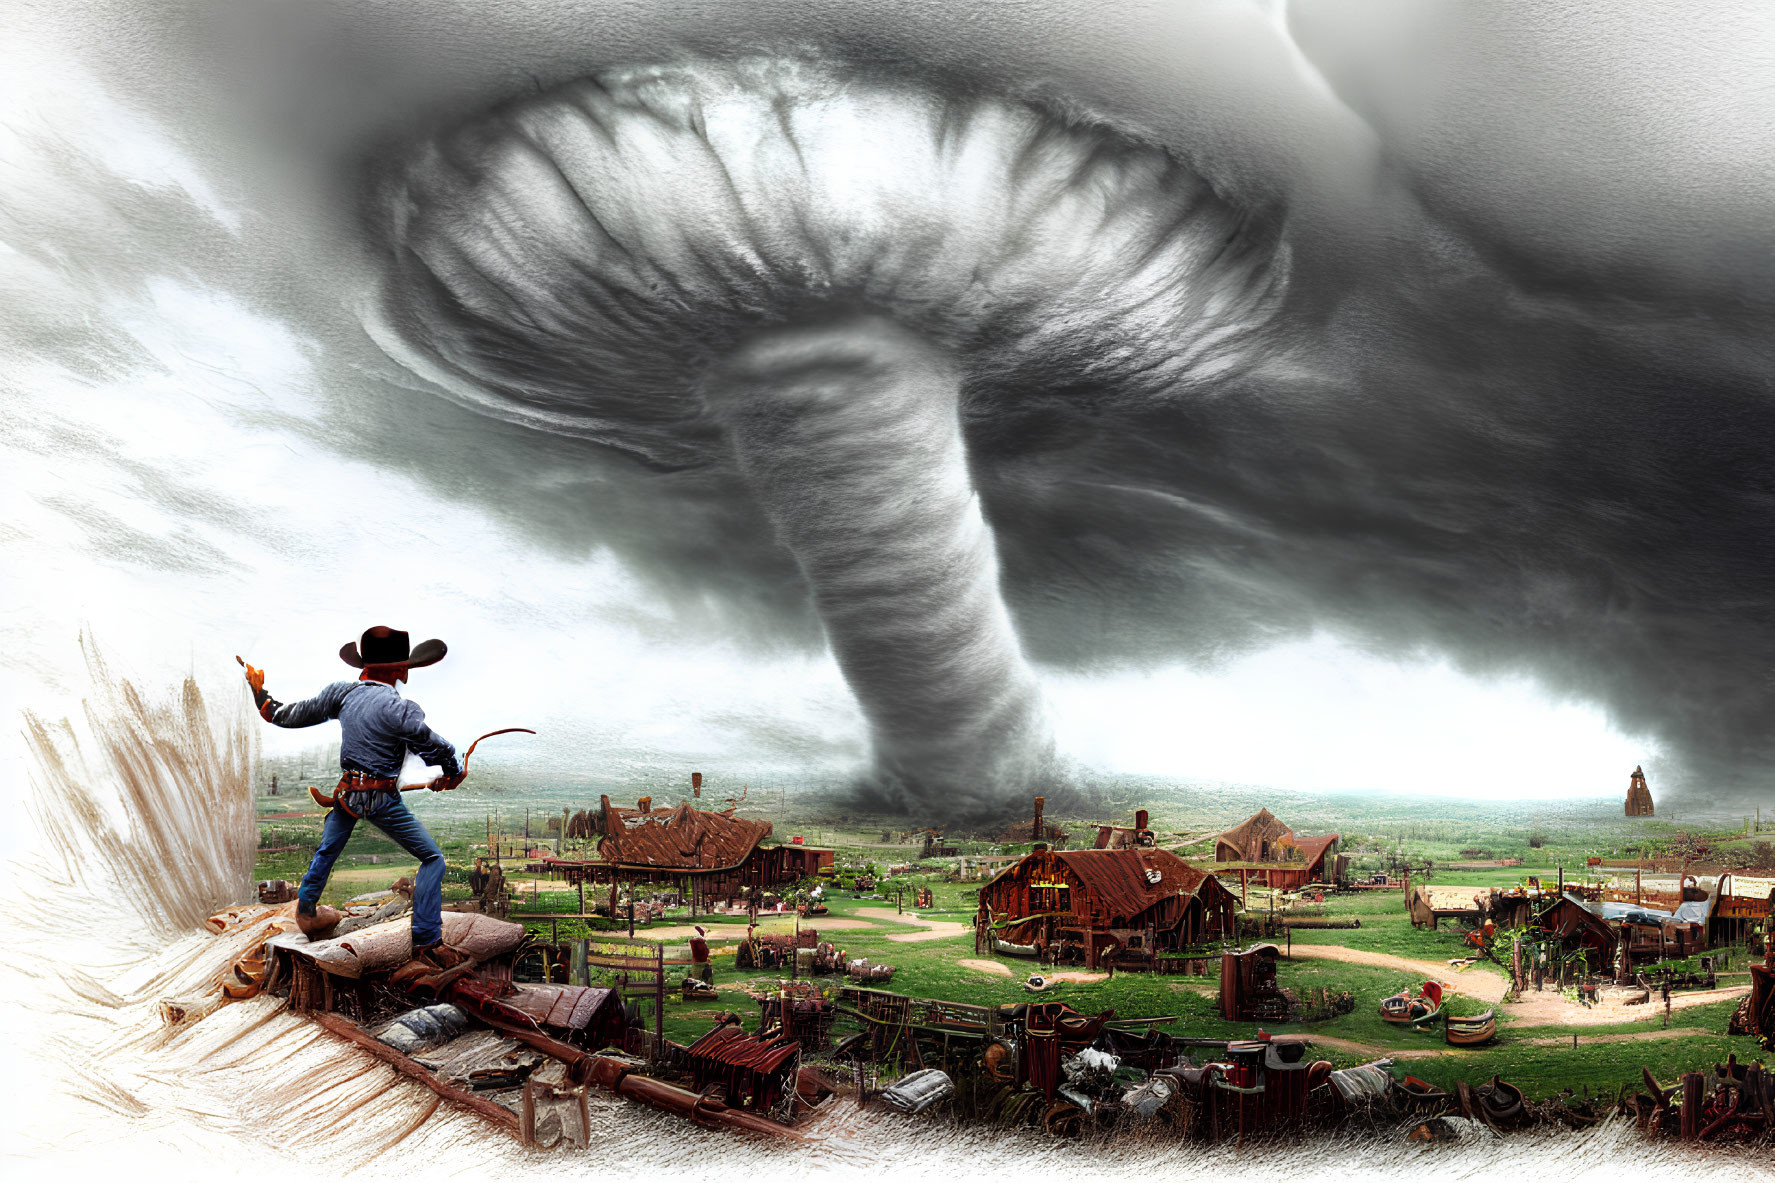 Cowboy overlooking Western town with massive tornado nearby